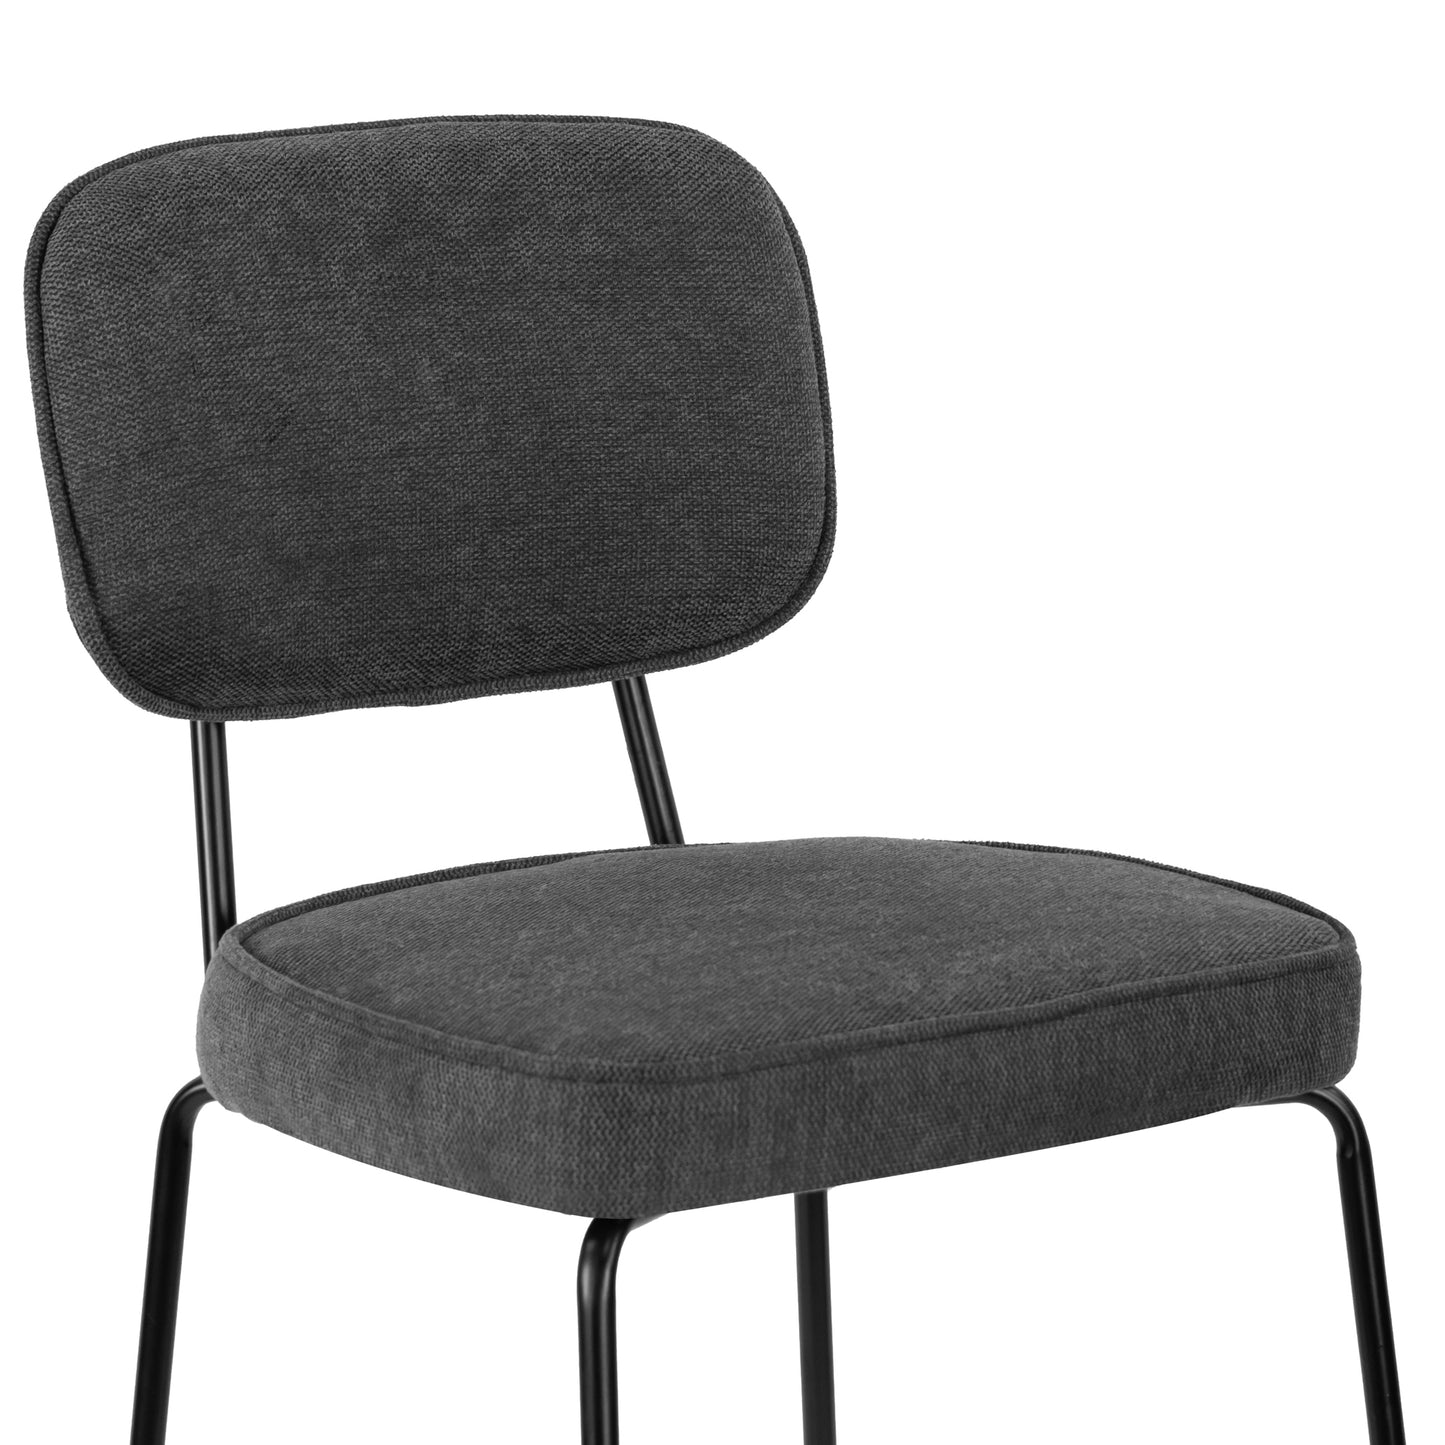 Set of 2 Avel Gray Fabric Counter Stool with Black Metal Legs